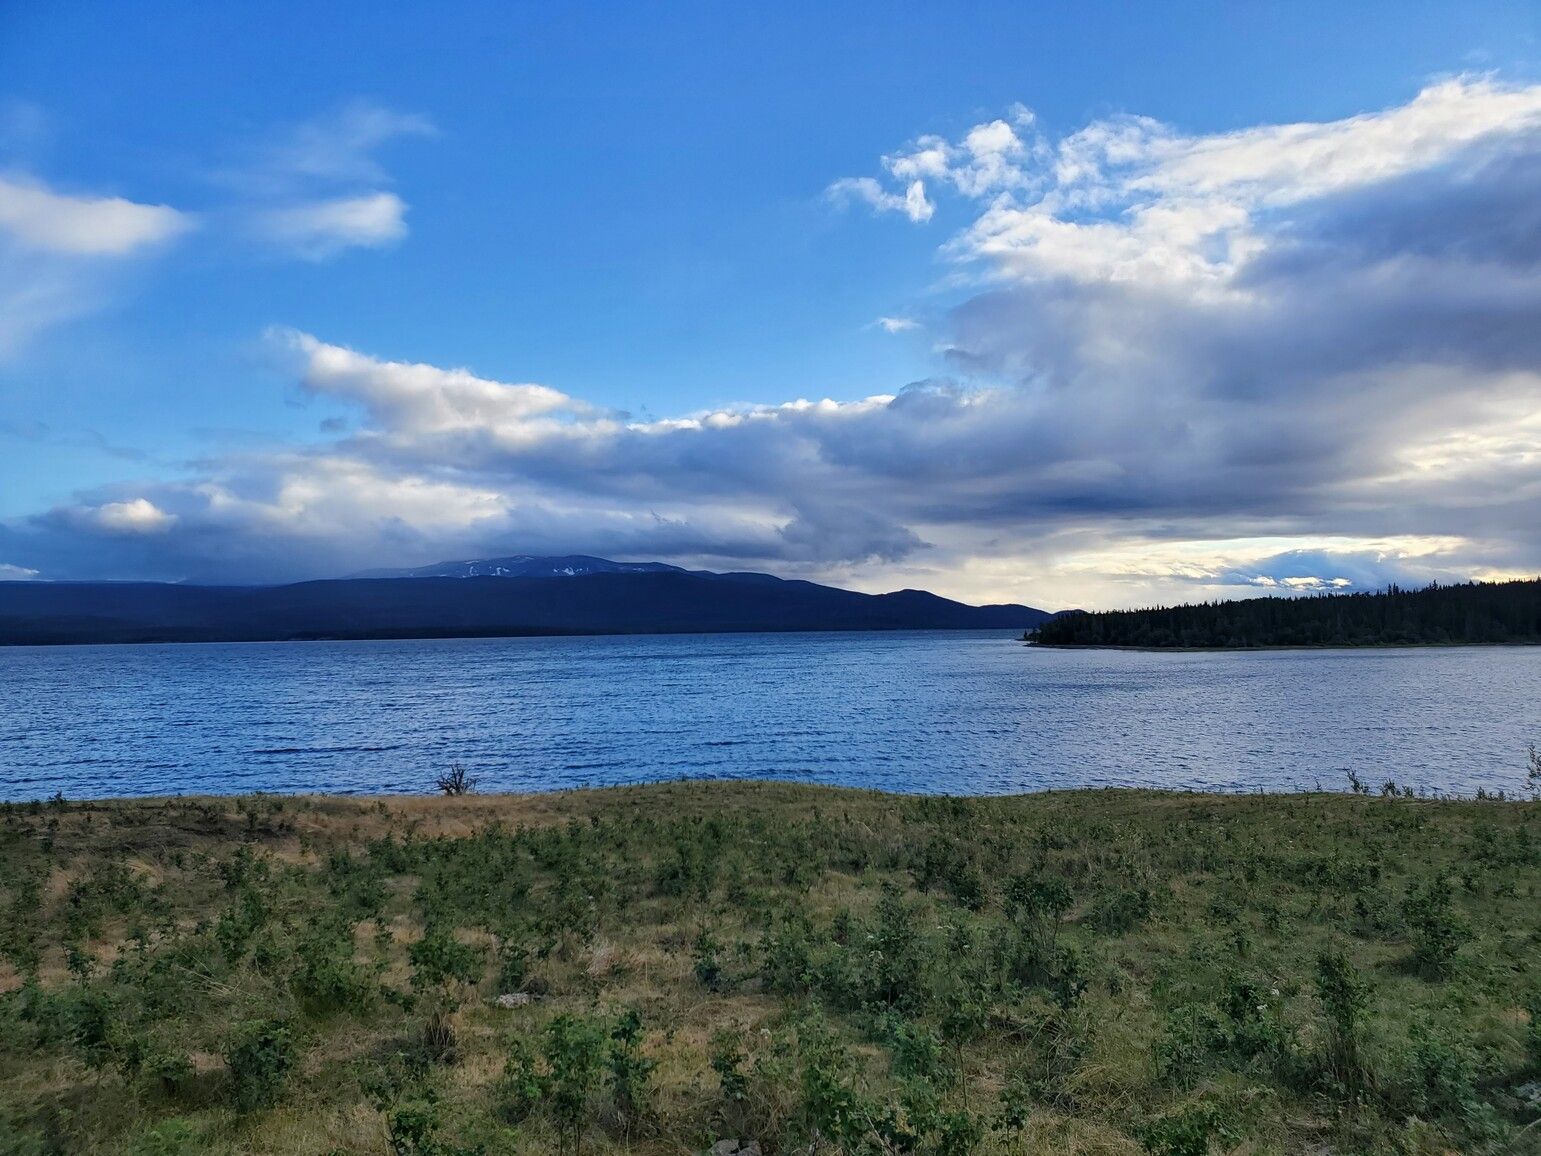 Wistaria shoreline overlooking Ootsa Lake with the Quanchus Mountains in the background.